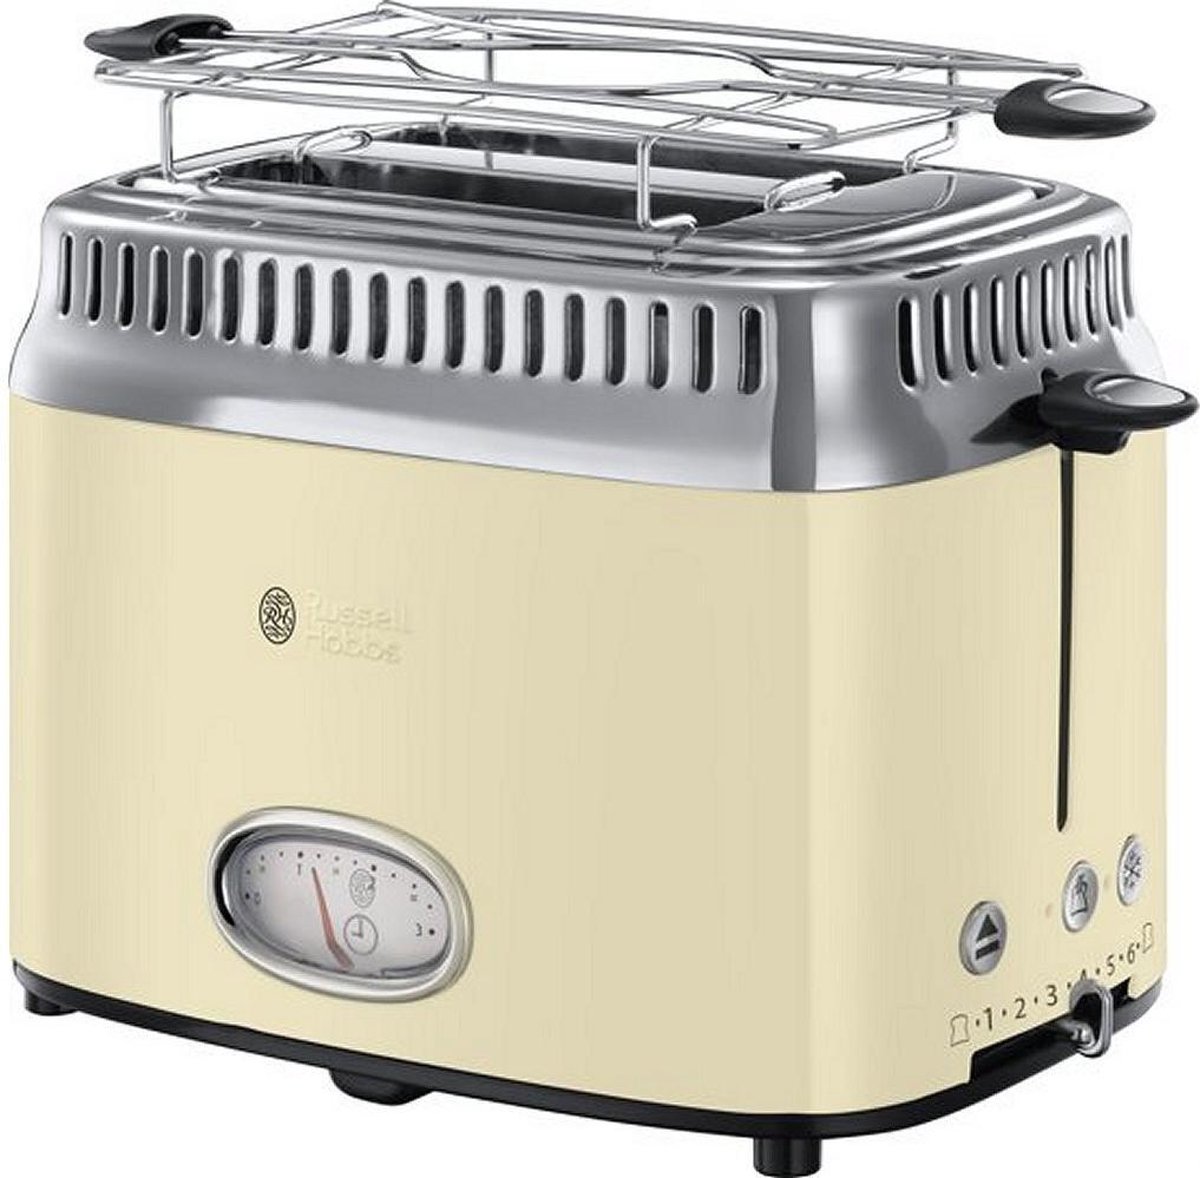 Russell Hobbs 21682-56 Retro Vintage - Grille-pain - Crème